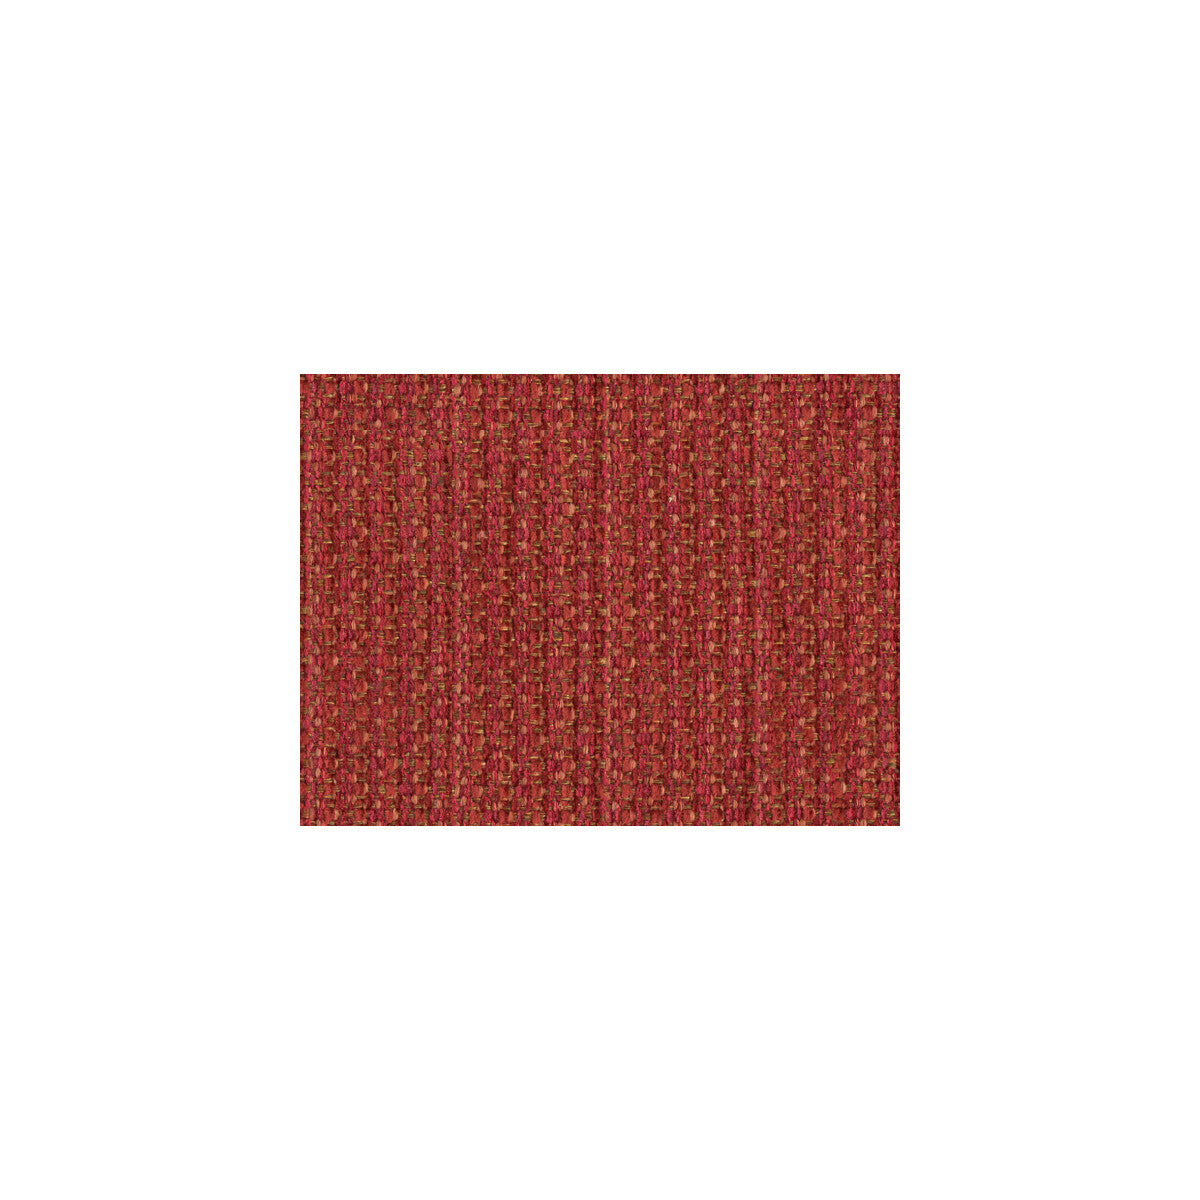 Chenille Tweed fabric in ruby color - pattern 30962.19.0 - by Kravet Smart in the Gis collection